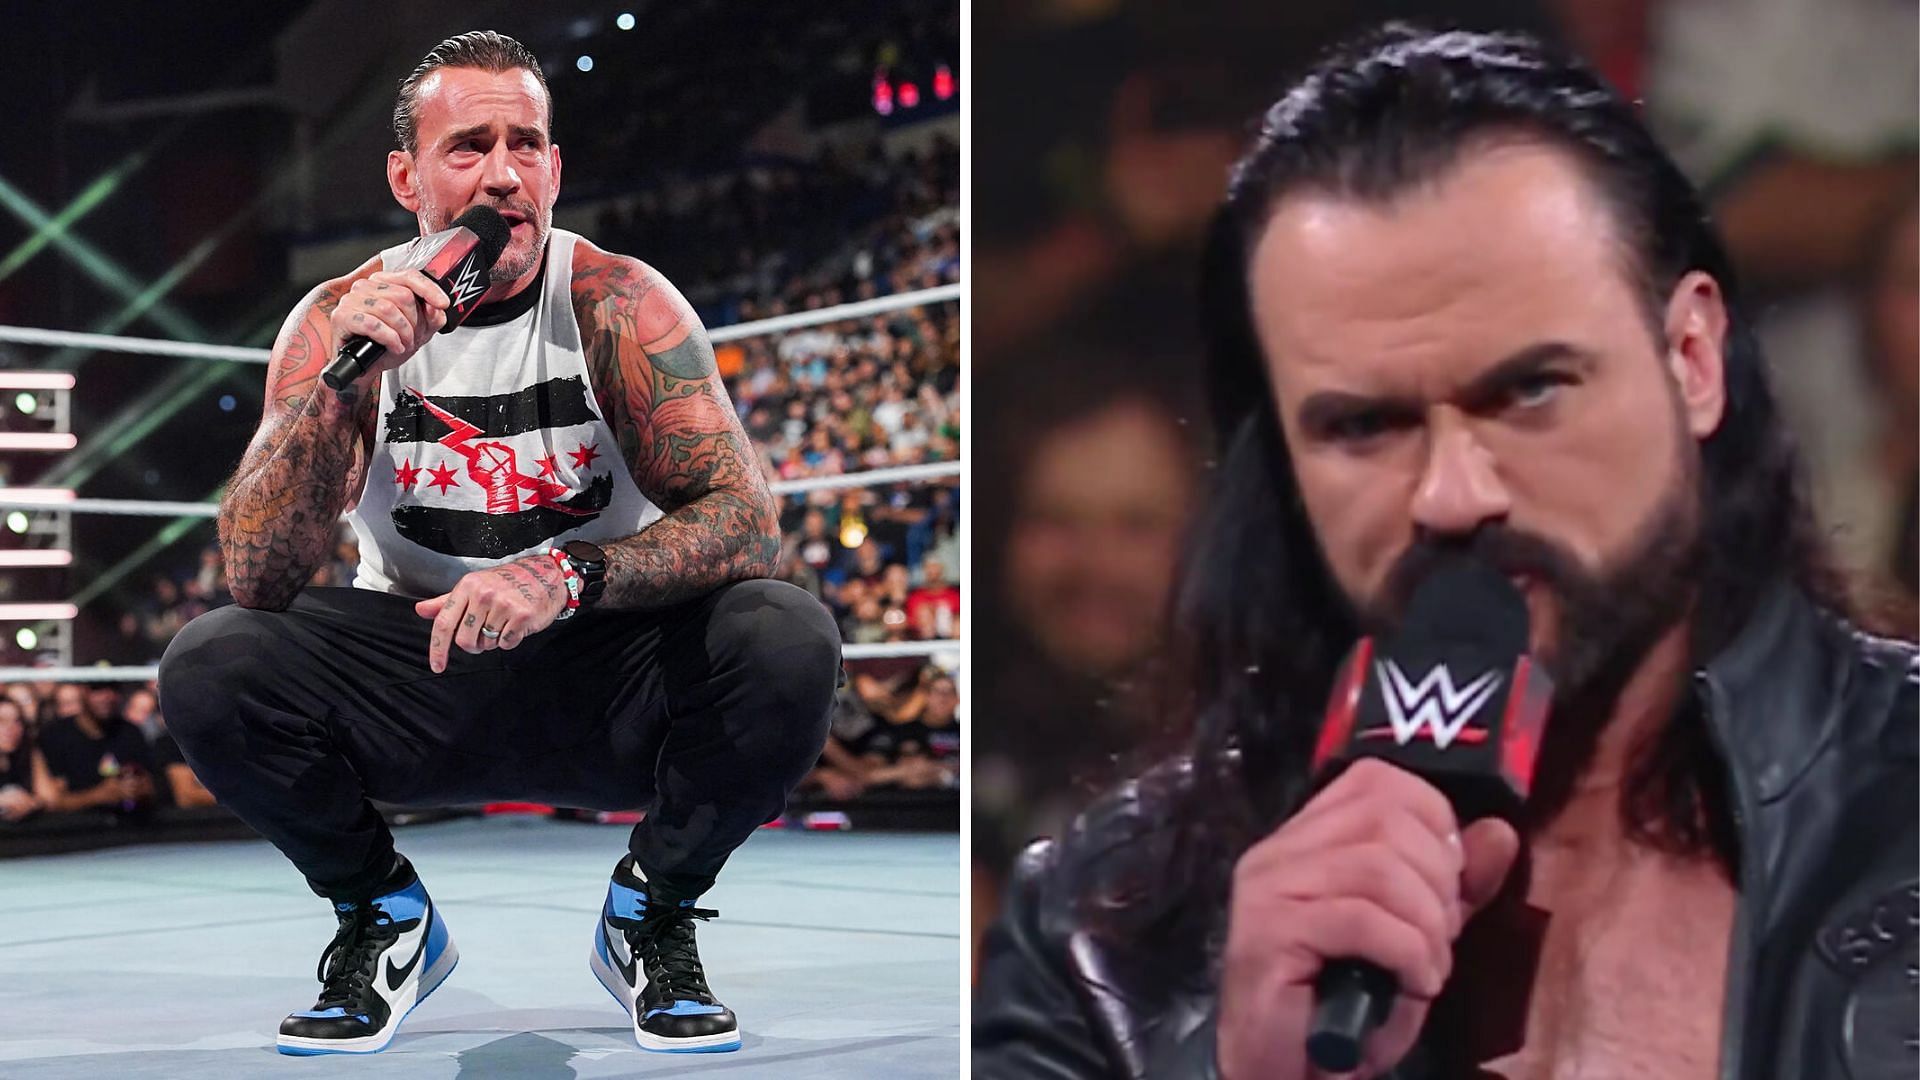 CM Punk and Drew McIntyre are in a heated feud [Image credits: wwe.com and WWE